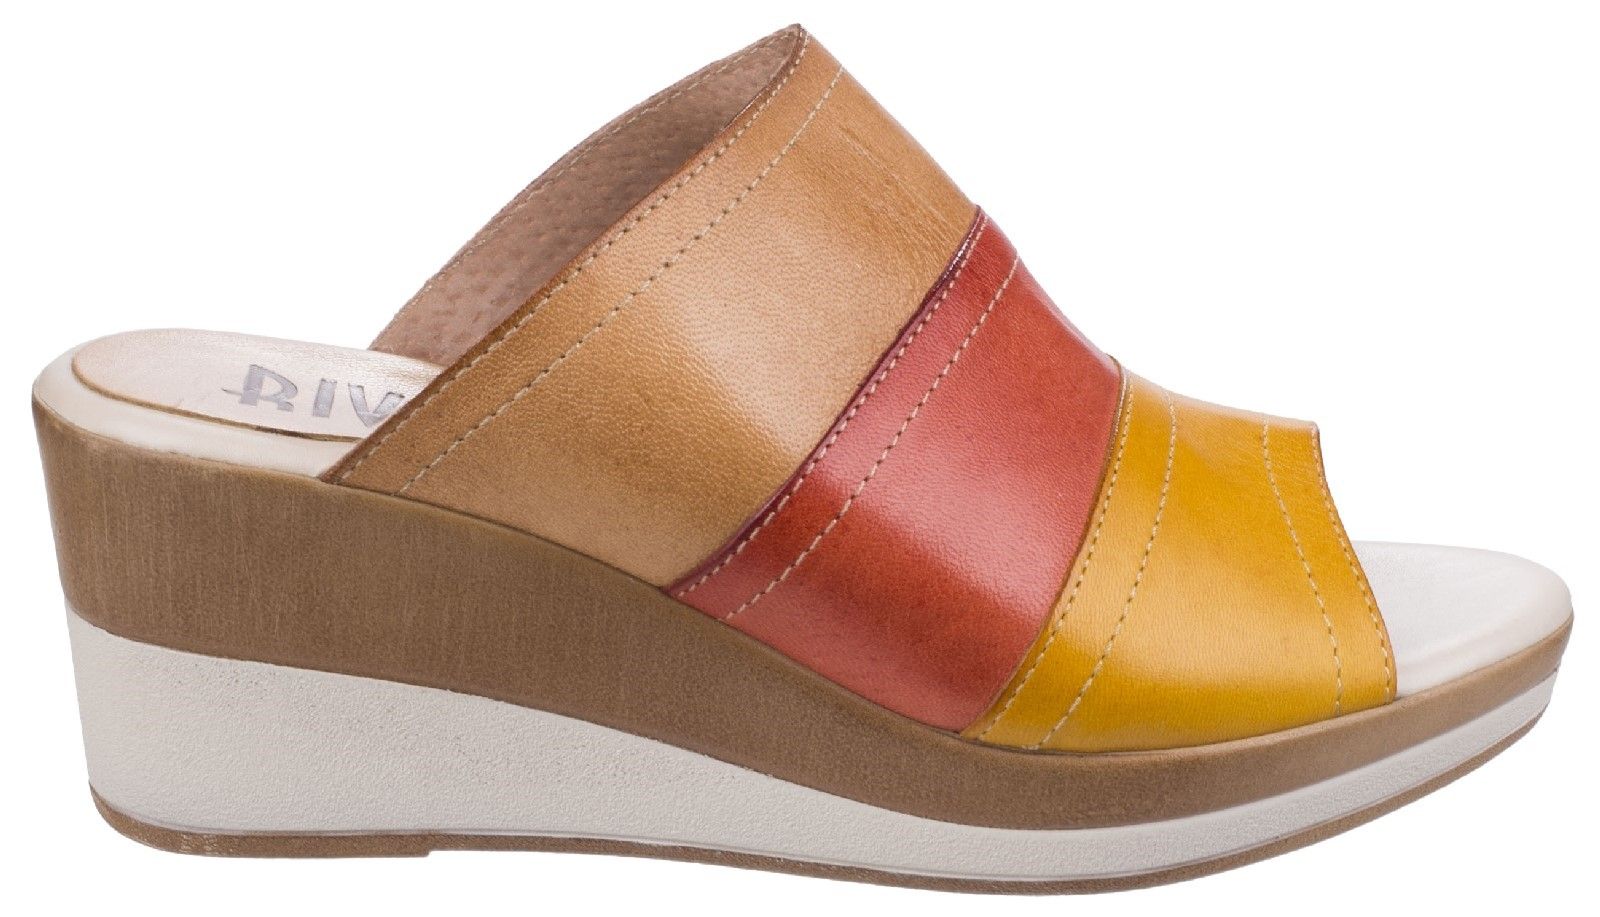 Classic Italian inspired high wedge mule sandal with a twist of colours and textures.  A two toned, dual textured platform wedge showcases layered multi-coloured leathers. Slip-on open-toe mule sandals from Riva. 
Multi-coloured leather upper. 
Comfort padded leather lined foot bed. 
Inner anti-slippage leather pad. 
Two-toned, two-textured platform wedge.